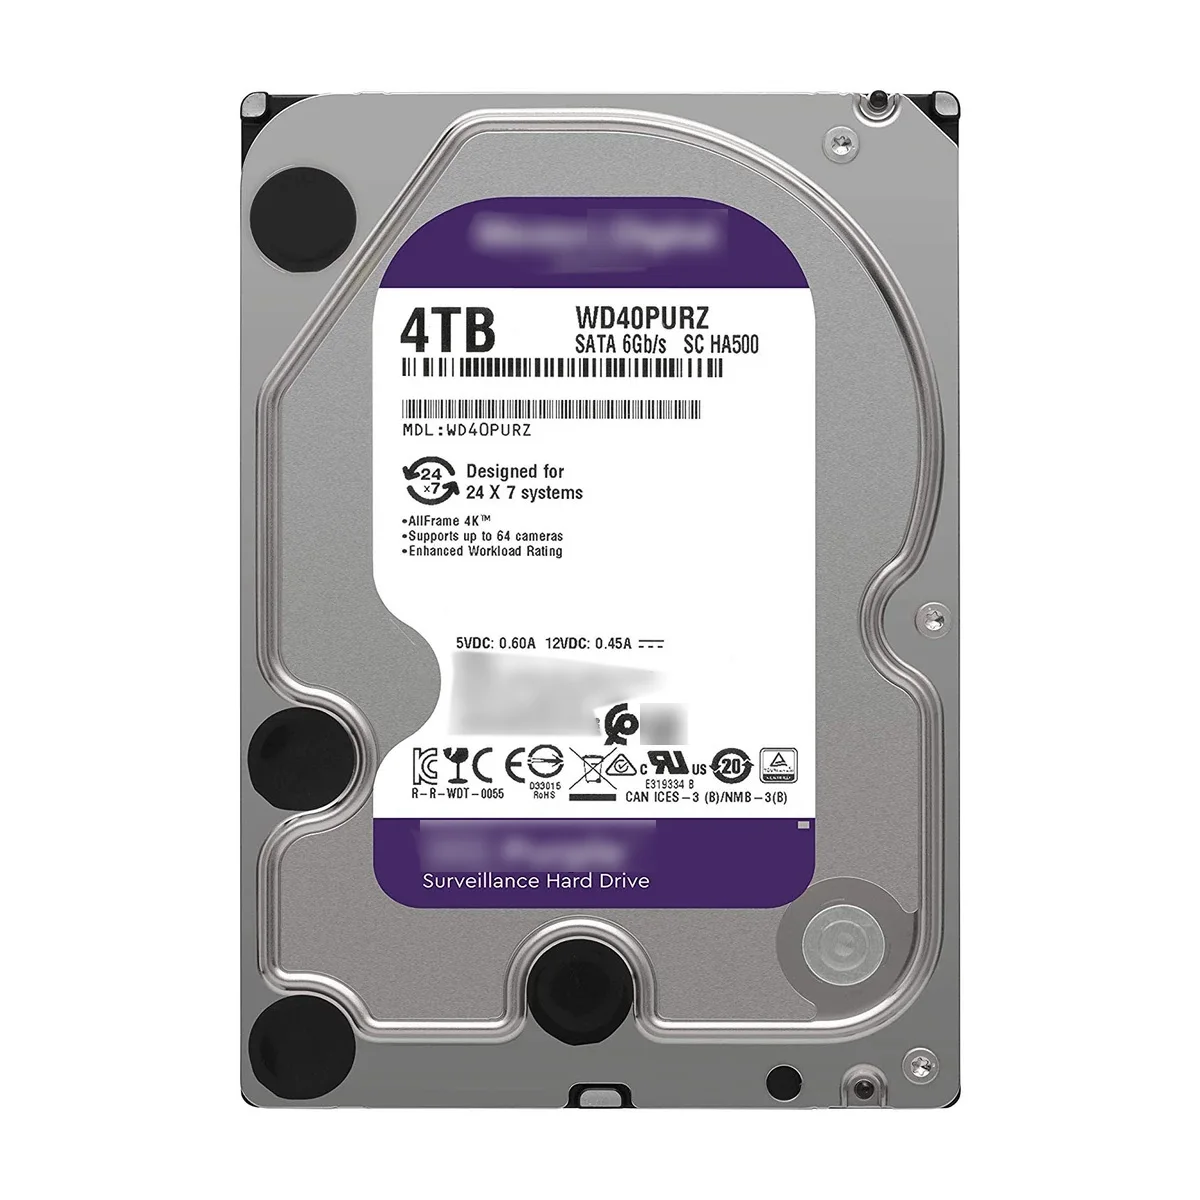 

Original WD40PURZ HDD hard disk drive 4TB WD40PURX Surveillance Class purple HDD special for security CCTV DVR NVR in stock